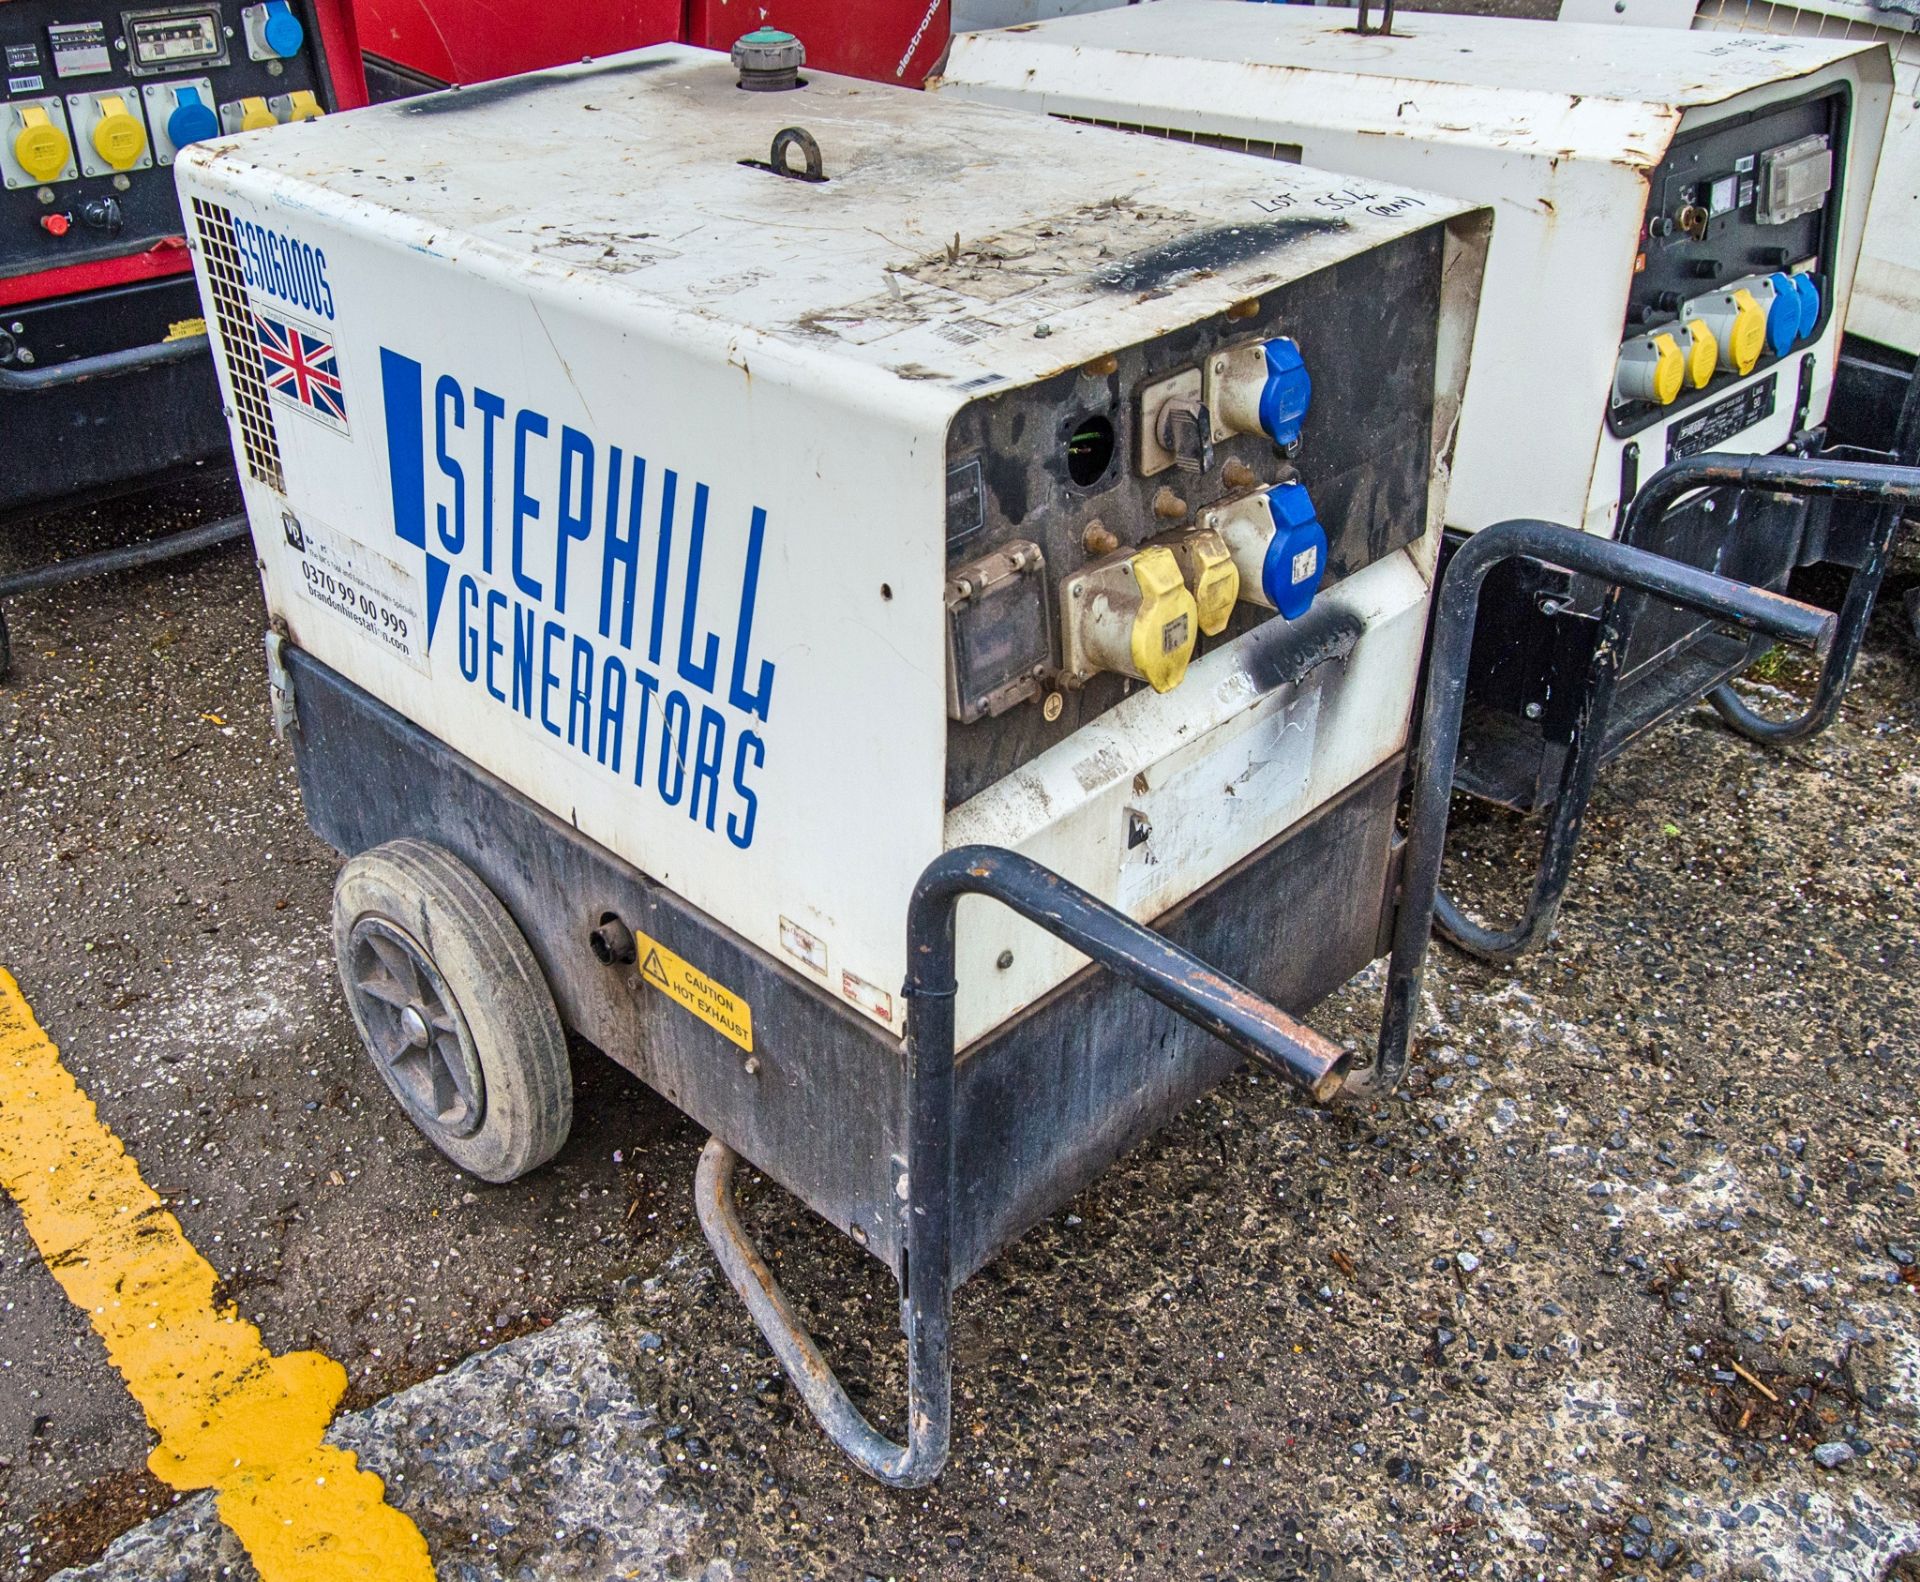 Stephill SSD6000S 6 kva diesel driven generator Recorded Hours: 1852 18064540 ** Panel loose **